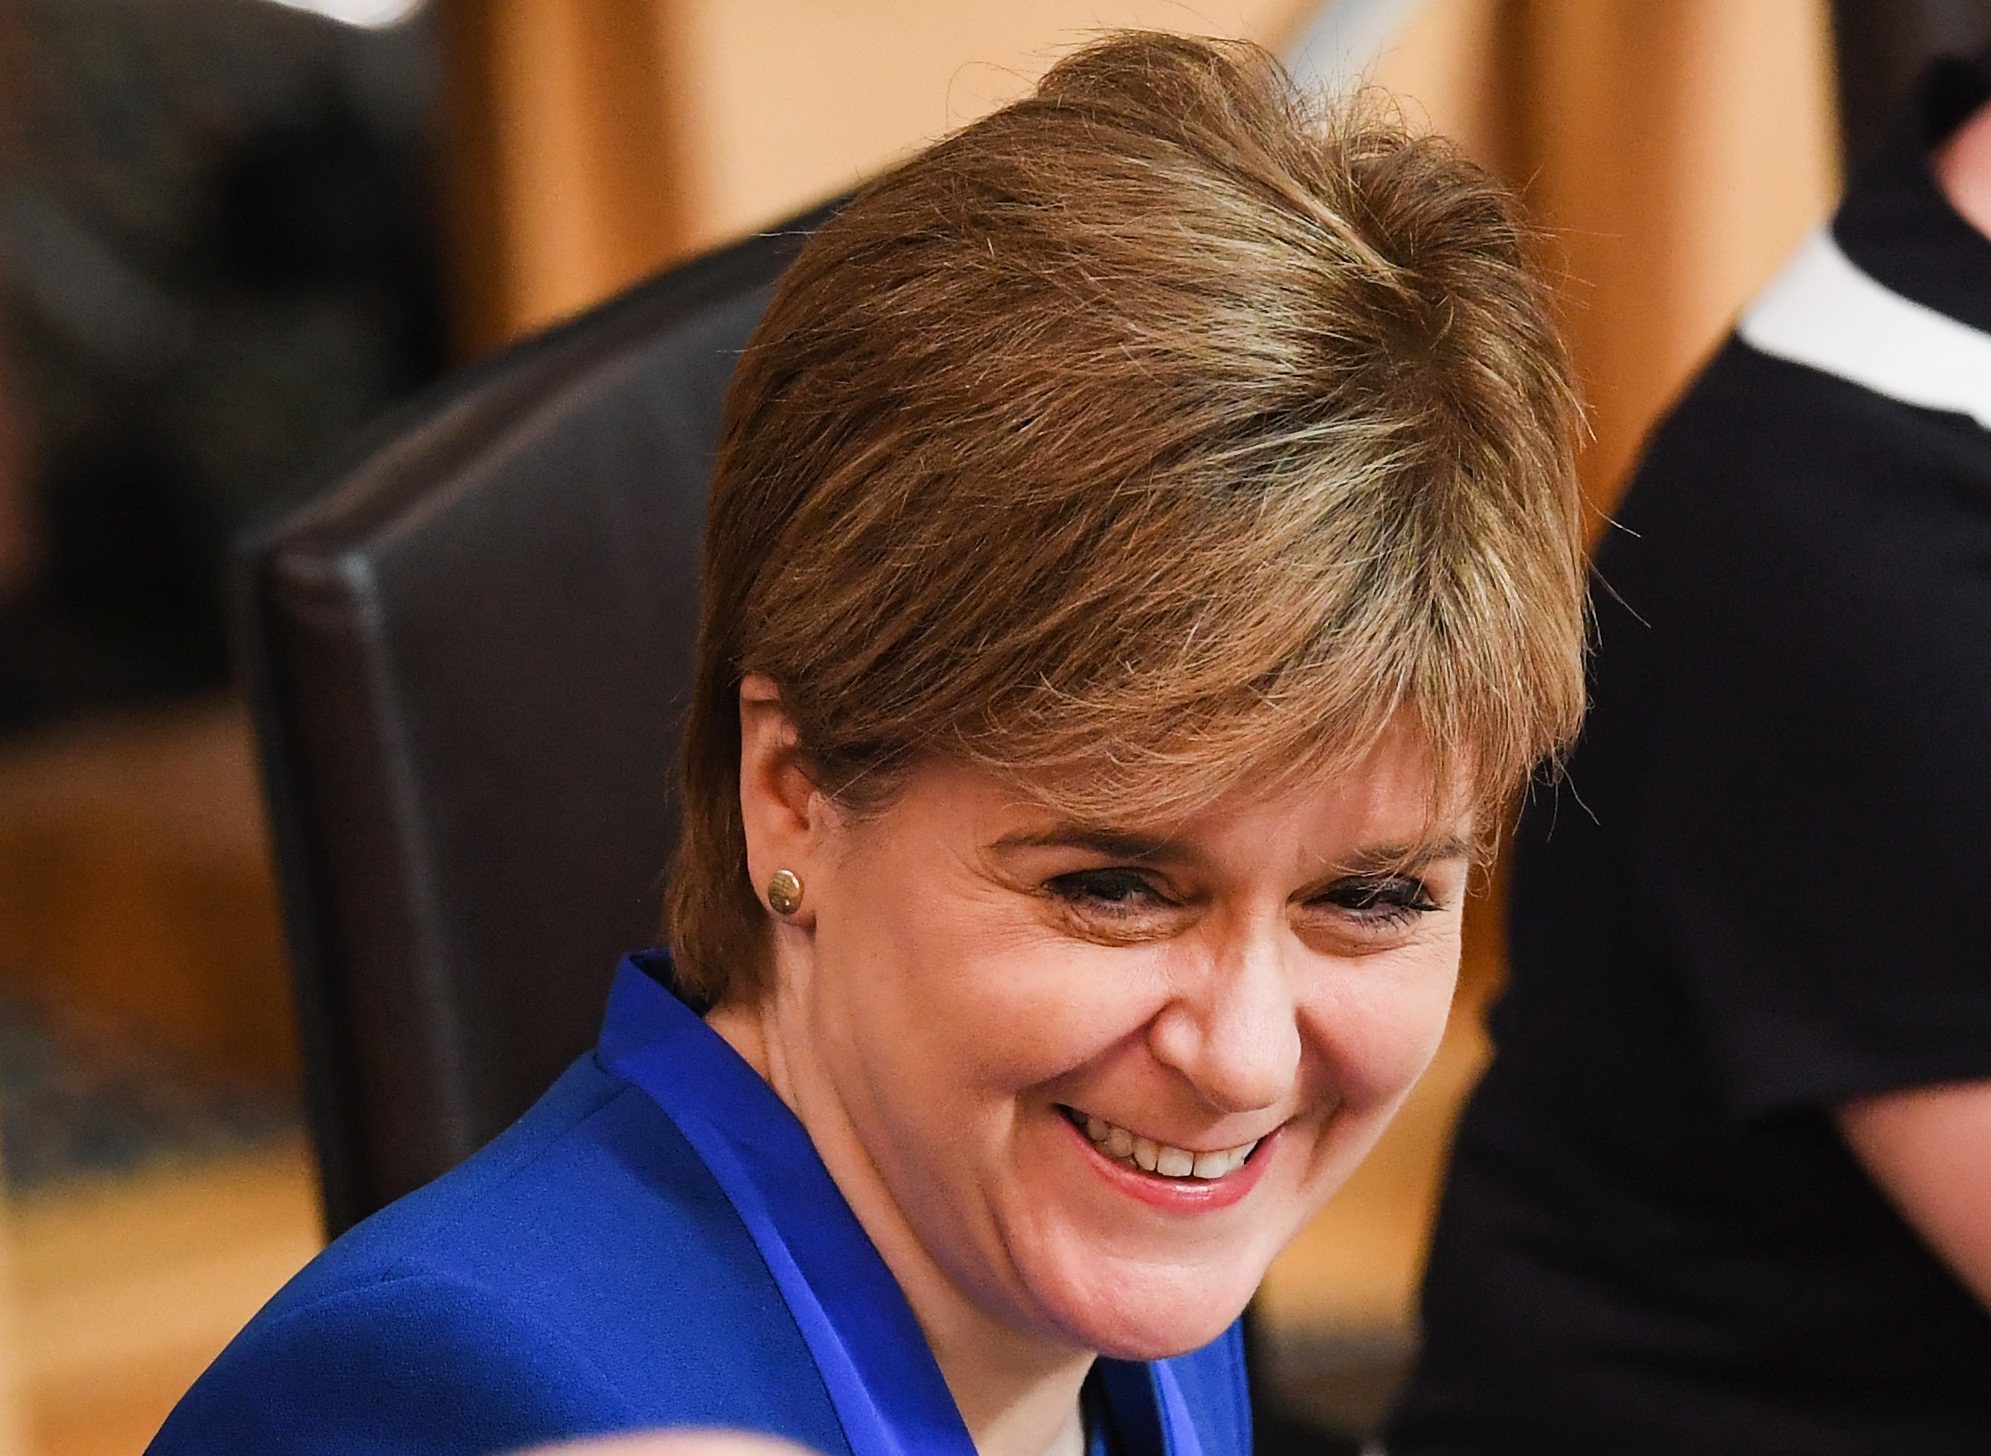 First Minister and SNP leader Nicola Sturgeon, Scottish Conservative leader Ruth Davidson, Labour's Kezia Dugdale, Patrick Harvie from the Green Party and Liberal Democrat Willie Rennie all voiced support for a law change (Jeff J Mitchell/Getty Images)